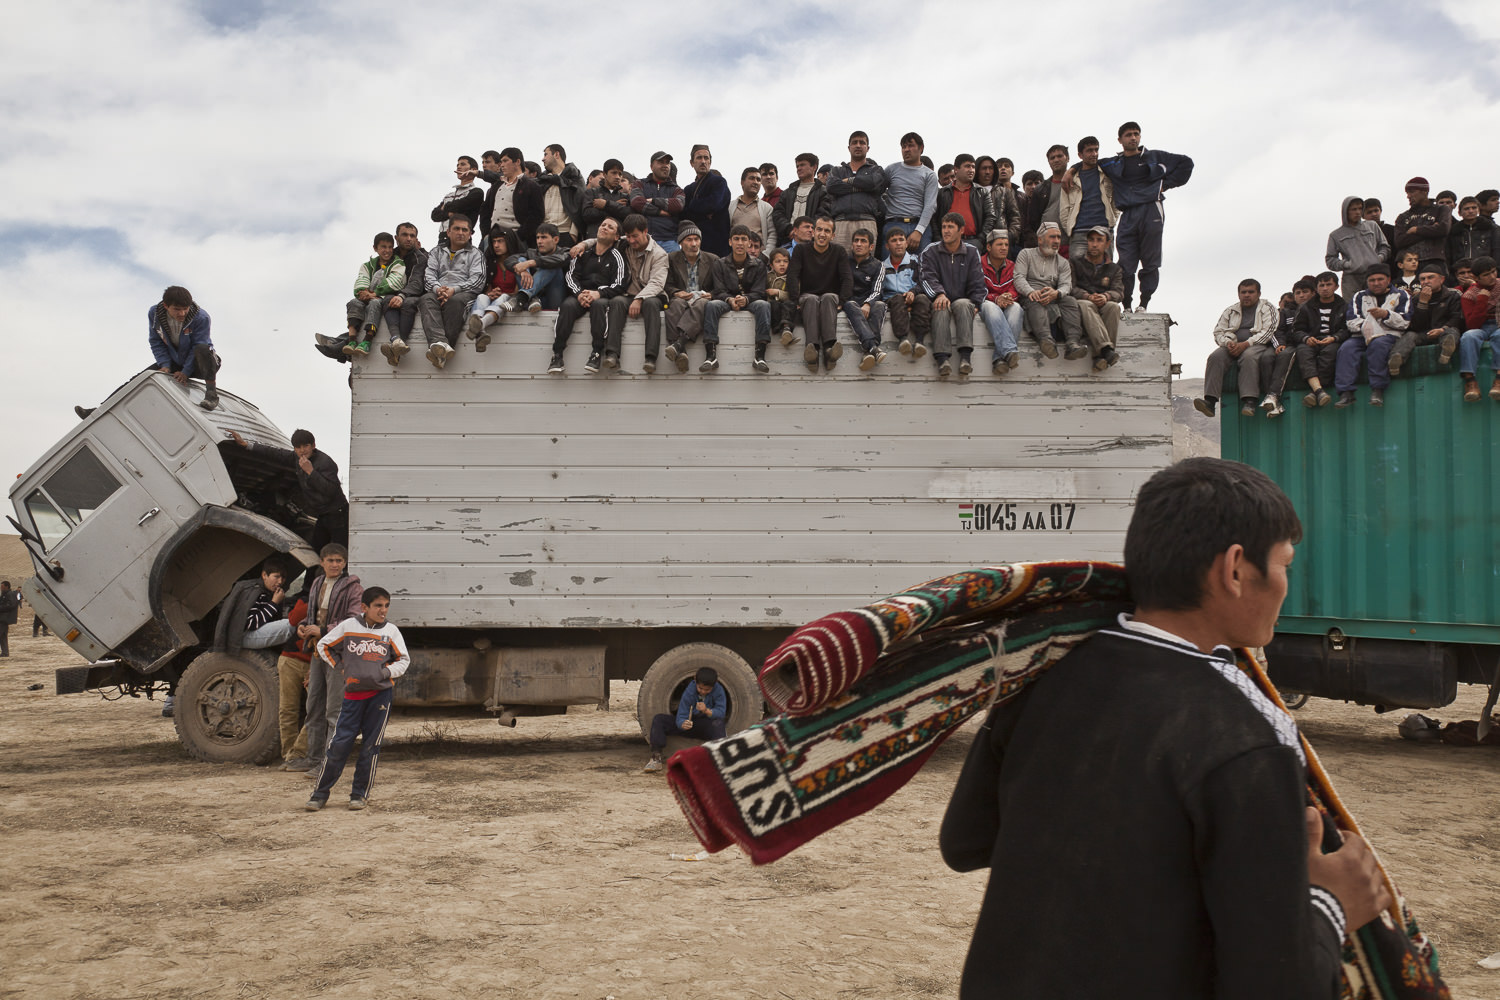  Spectators look on from a high perch on top of trucks, as a chovandoz assistant carries away a carpet won as a prize during the match in Hisor, western Tajikistan. 